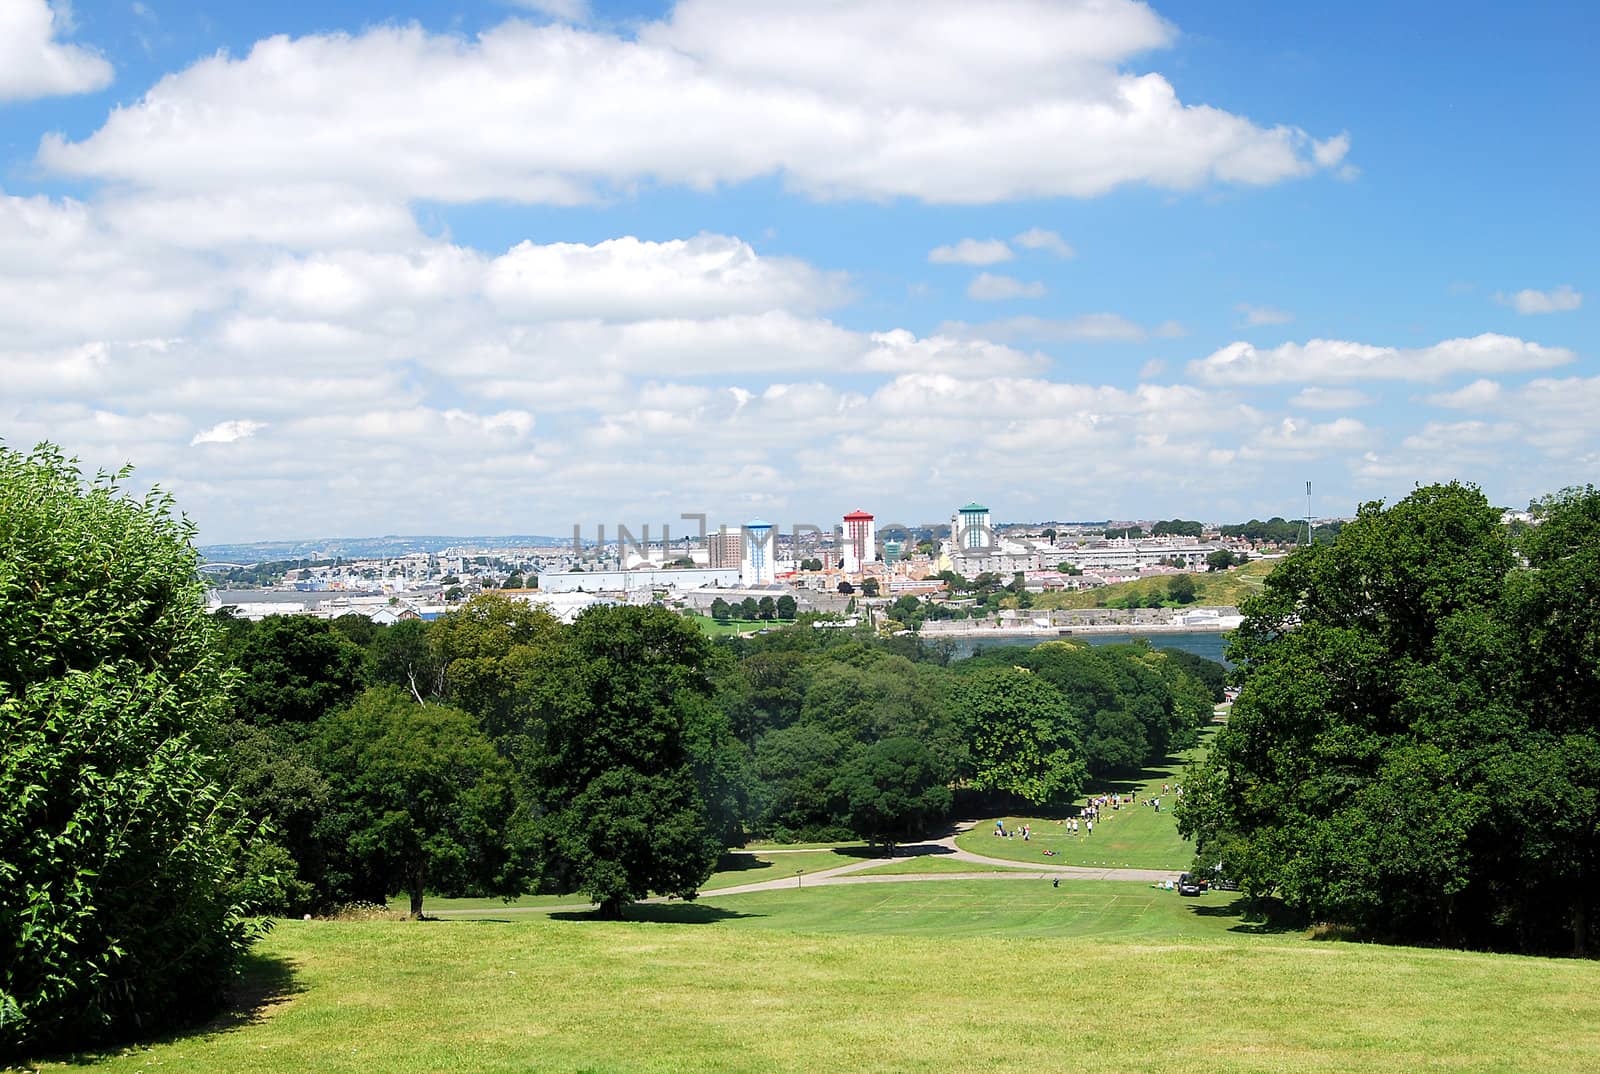 The City of Plymouth Devon from the Lawn of Mount Edgecumbe Torpoint showing the prominent Council Apartments